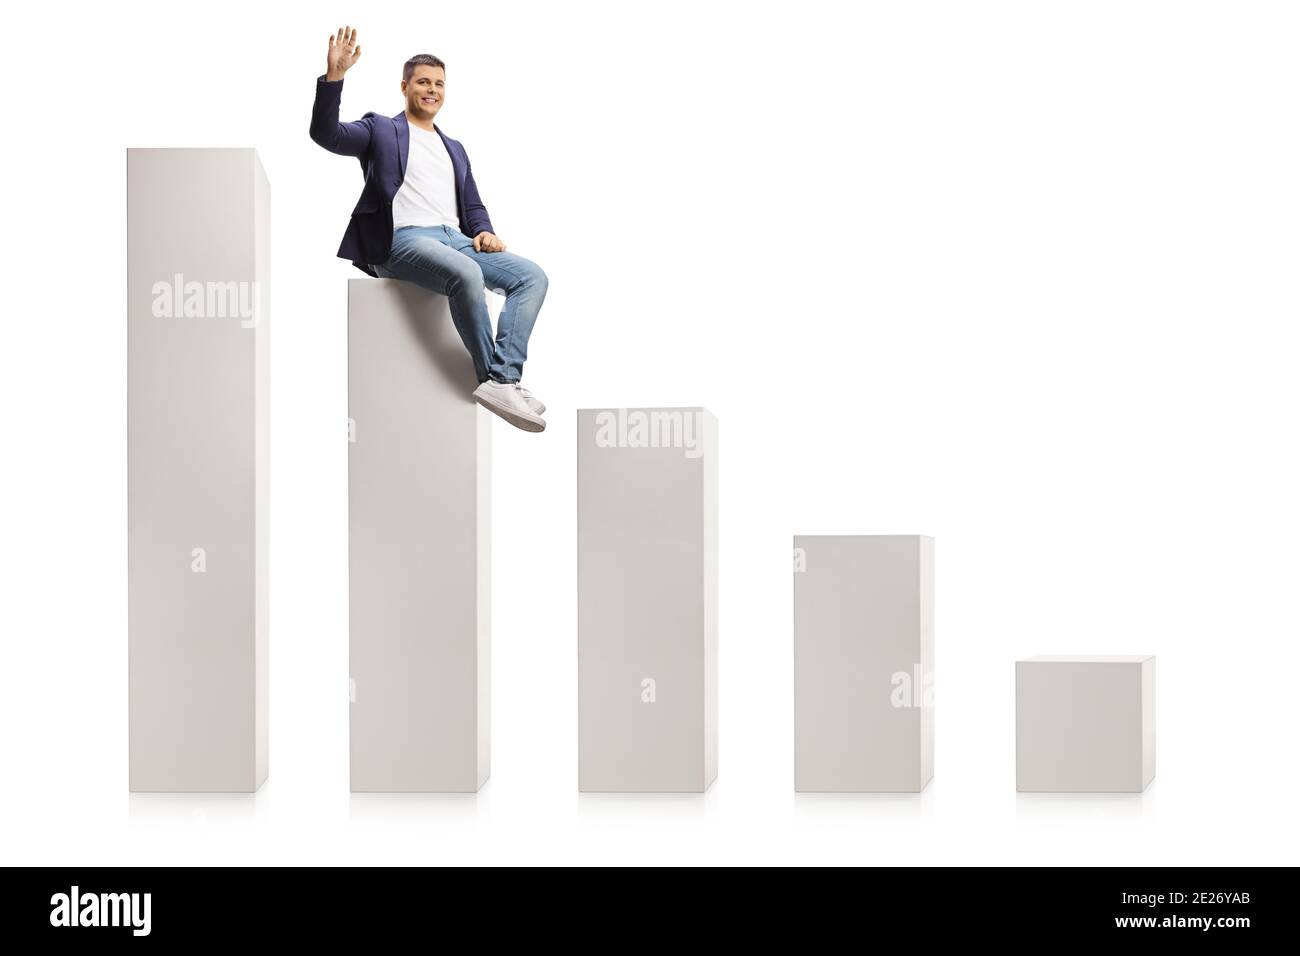 Man in jeans and suit sitting on a bar graph and waving at camera isolated on white background Stock Photo